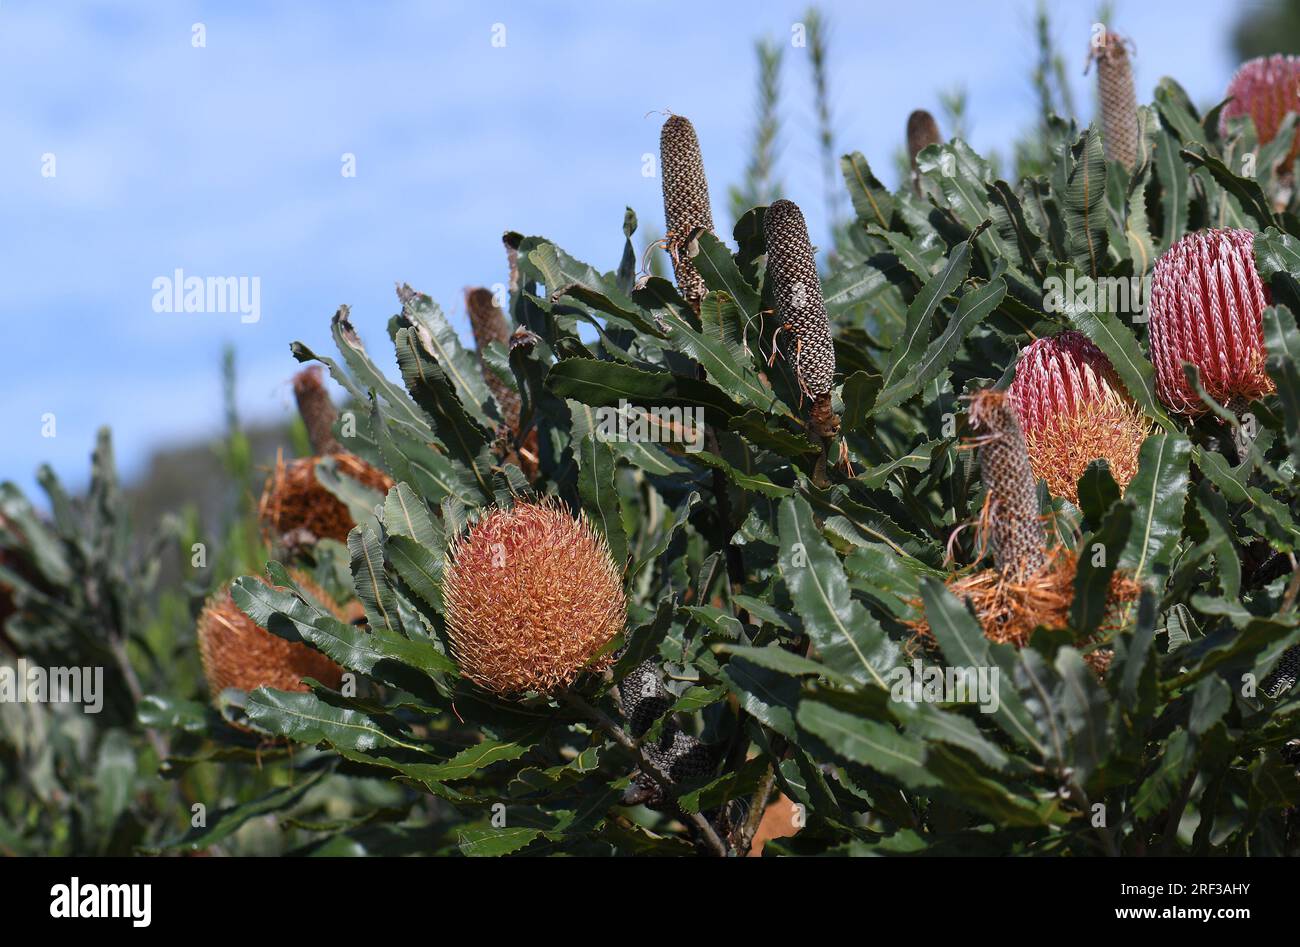 Hardy, drought tolerant Western Australian native garden with flowers and cones of the native Firewood Banksia, Banksia menziesii, family Proteaceae, Stock Photo